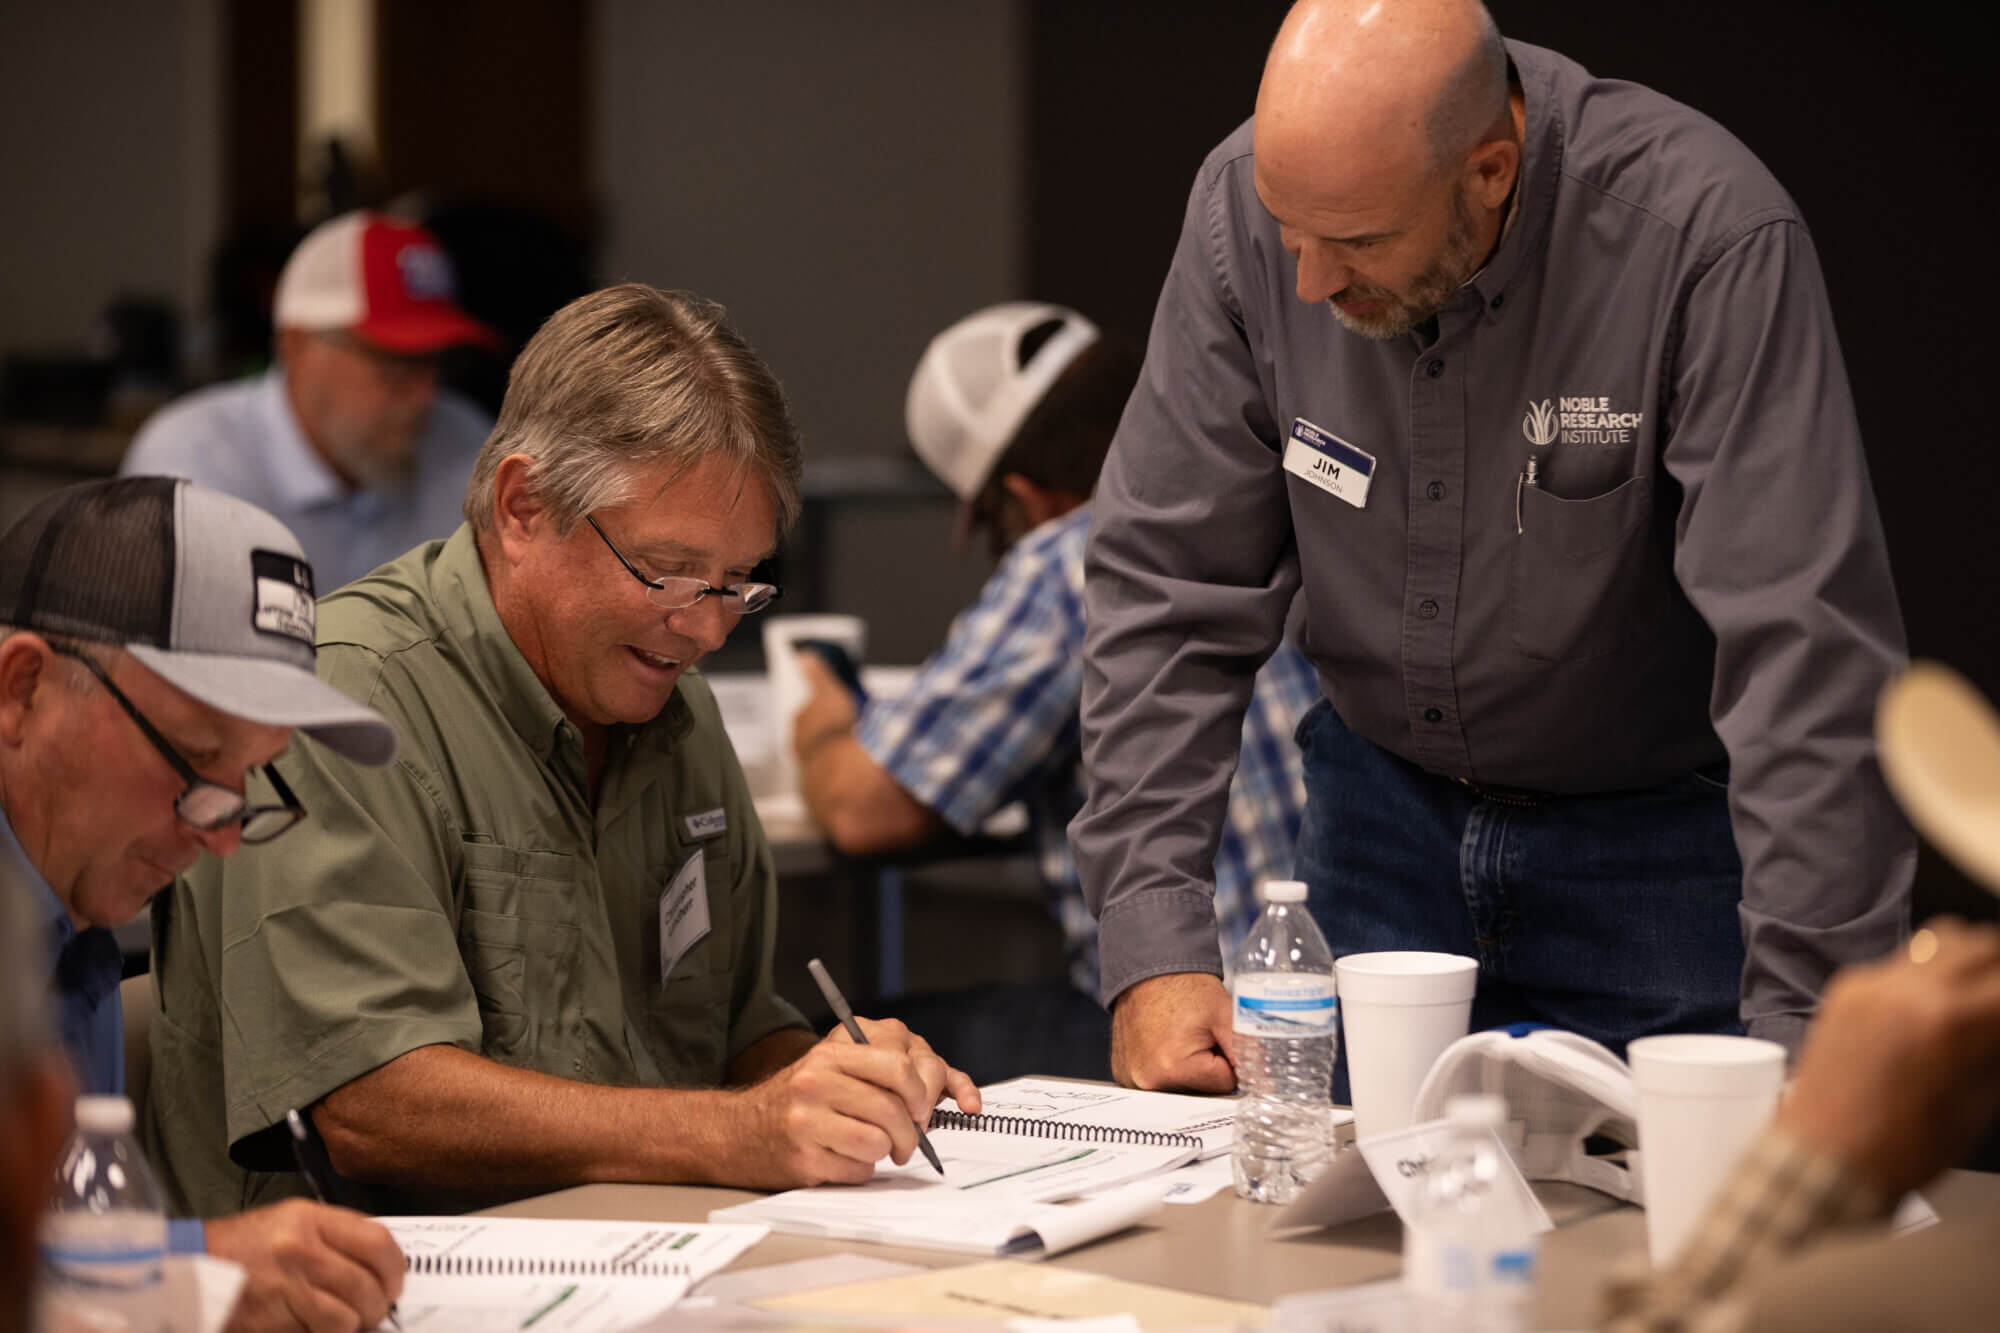 Noble Research Institute course facilitator Jim Johnson visits with rancher Christopher Landherr as he completes a workbook page during the Essentials of Regenerative Ranching course at Stephenville, Texas.